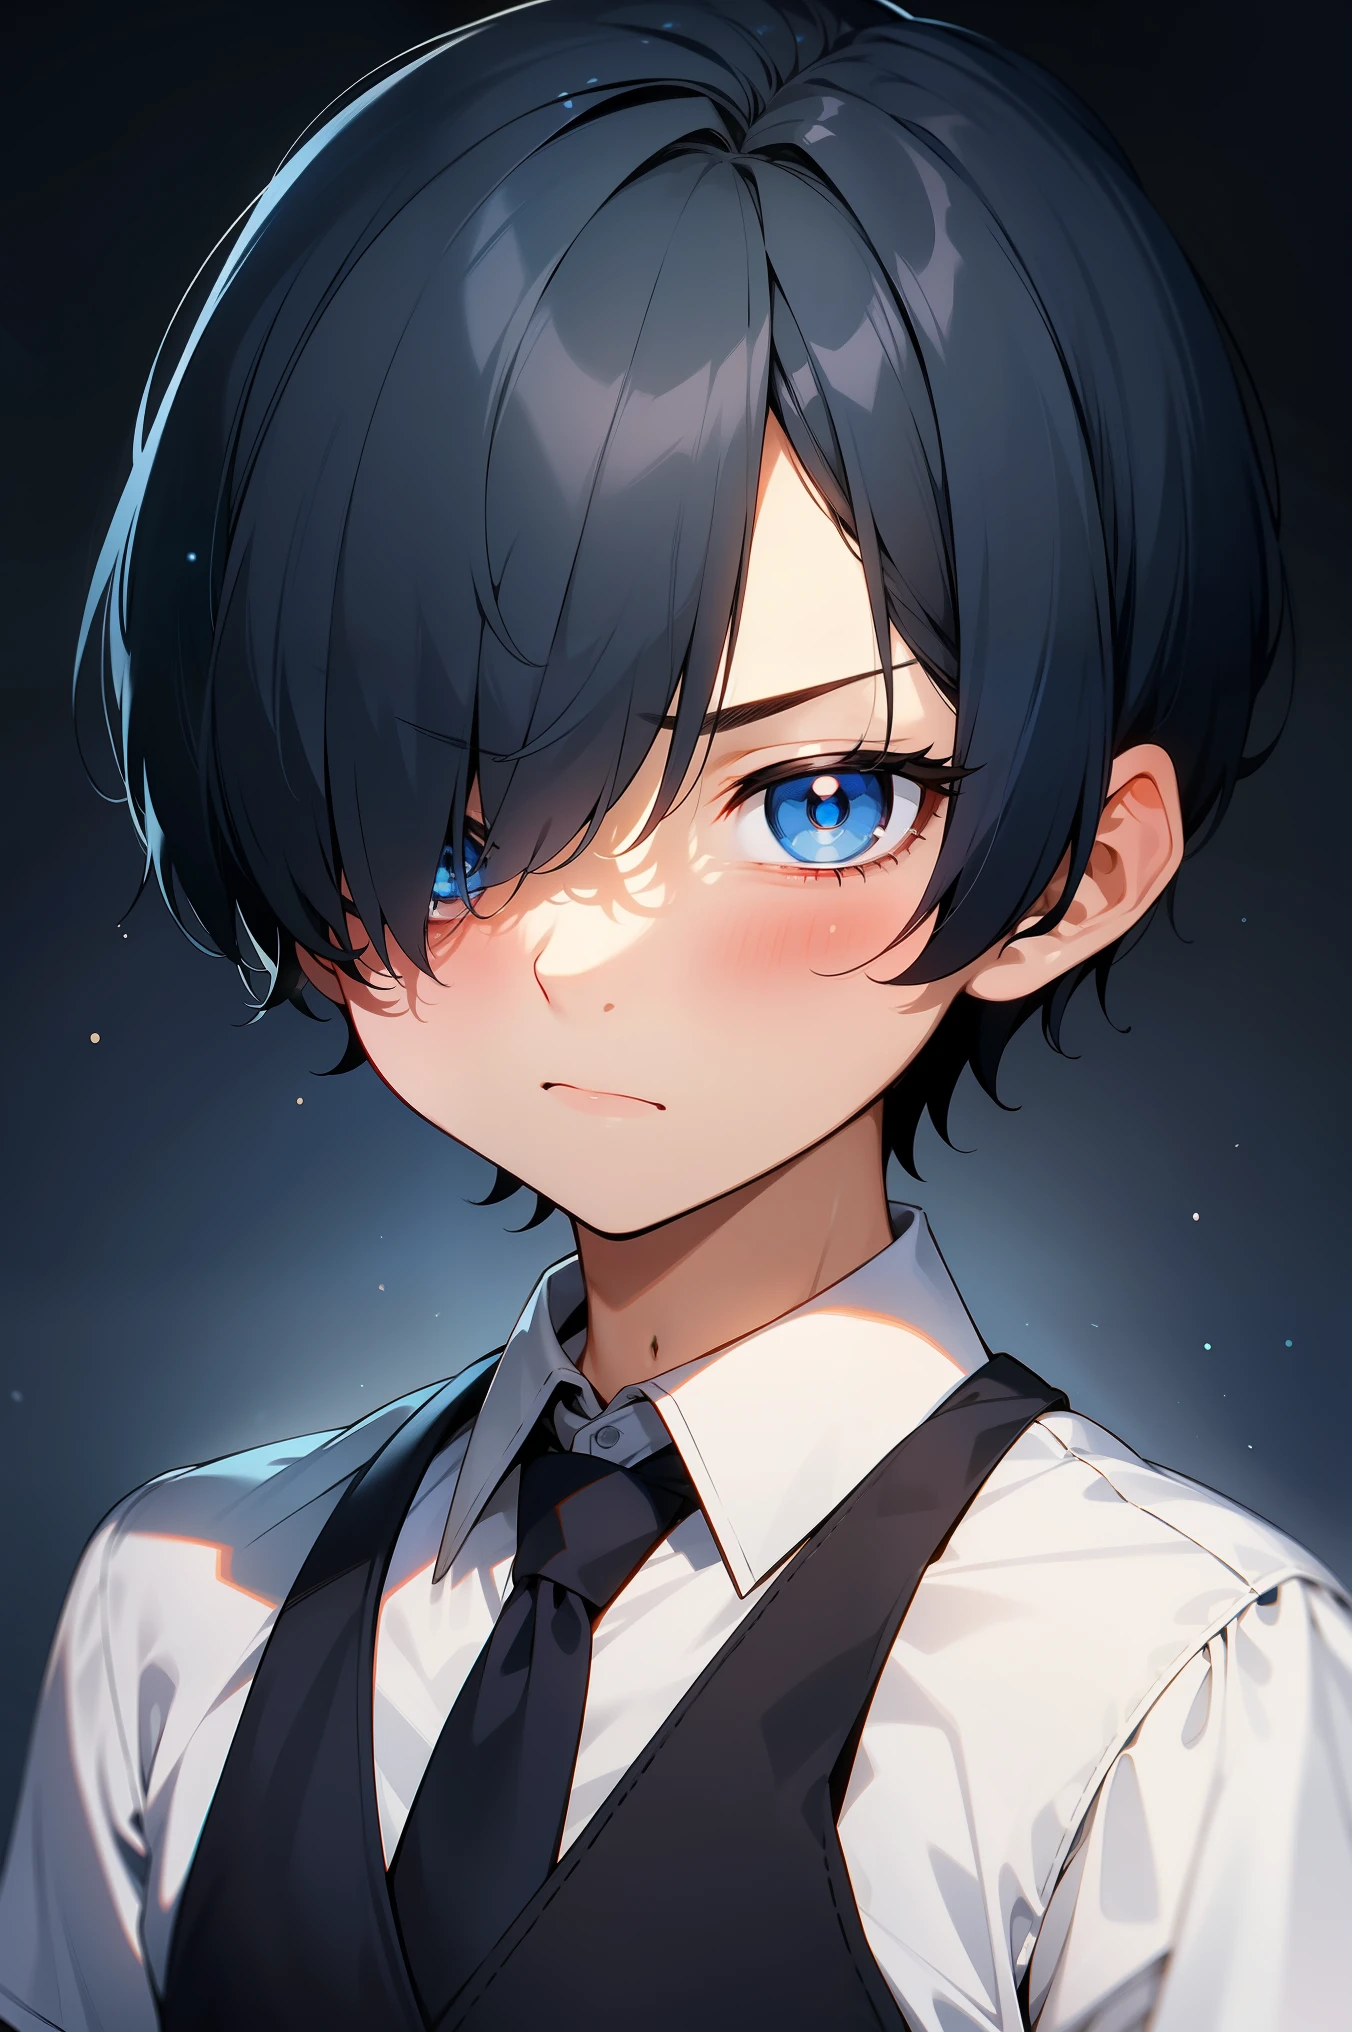 10 year old boy、asymmetrical bangs、Bangs covering the right eye、side short hair、dark blue short hair、dark blue hair、look up、，white shirt and black vest、black tie、dark blue eyes、dark blue hairHair over right eye、angry look、Front view、